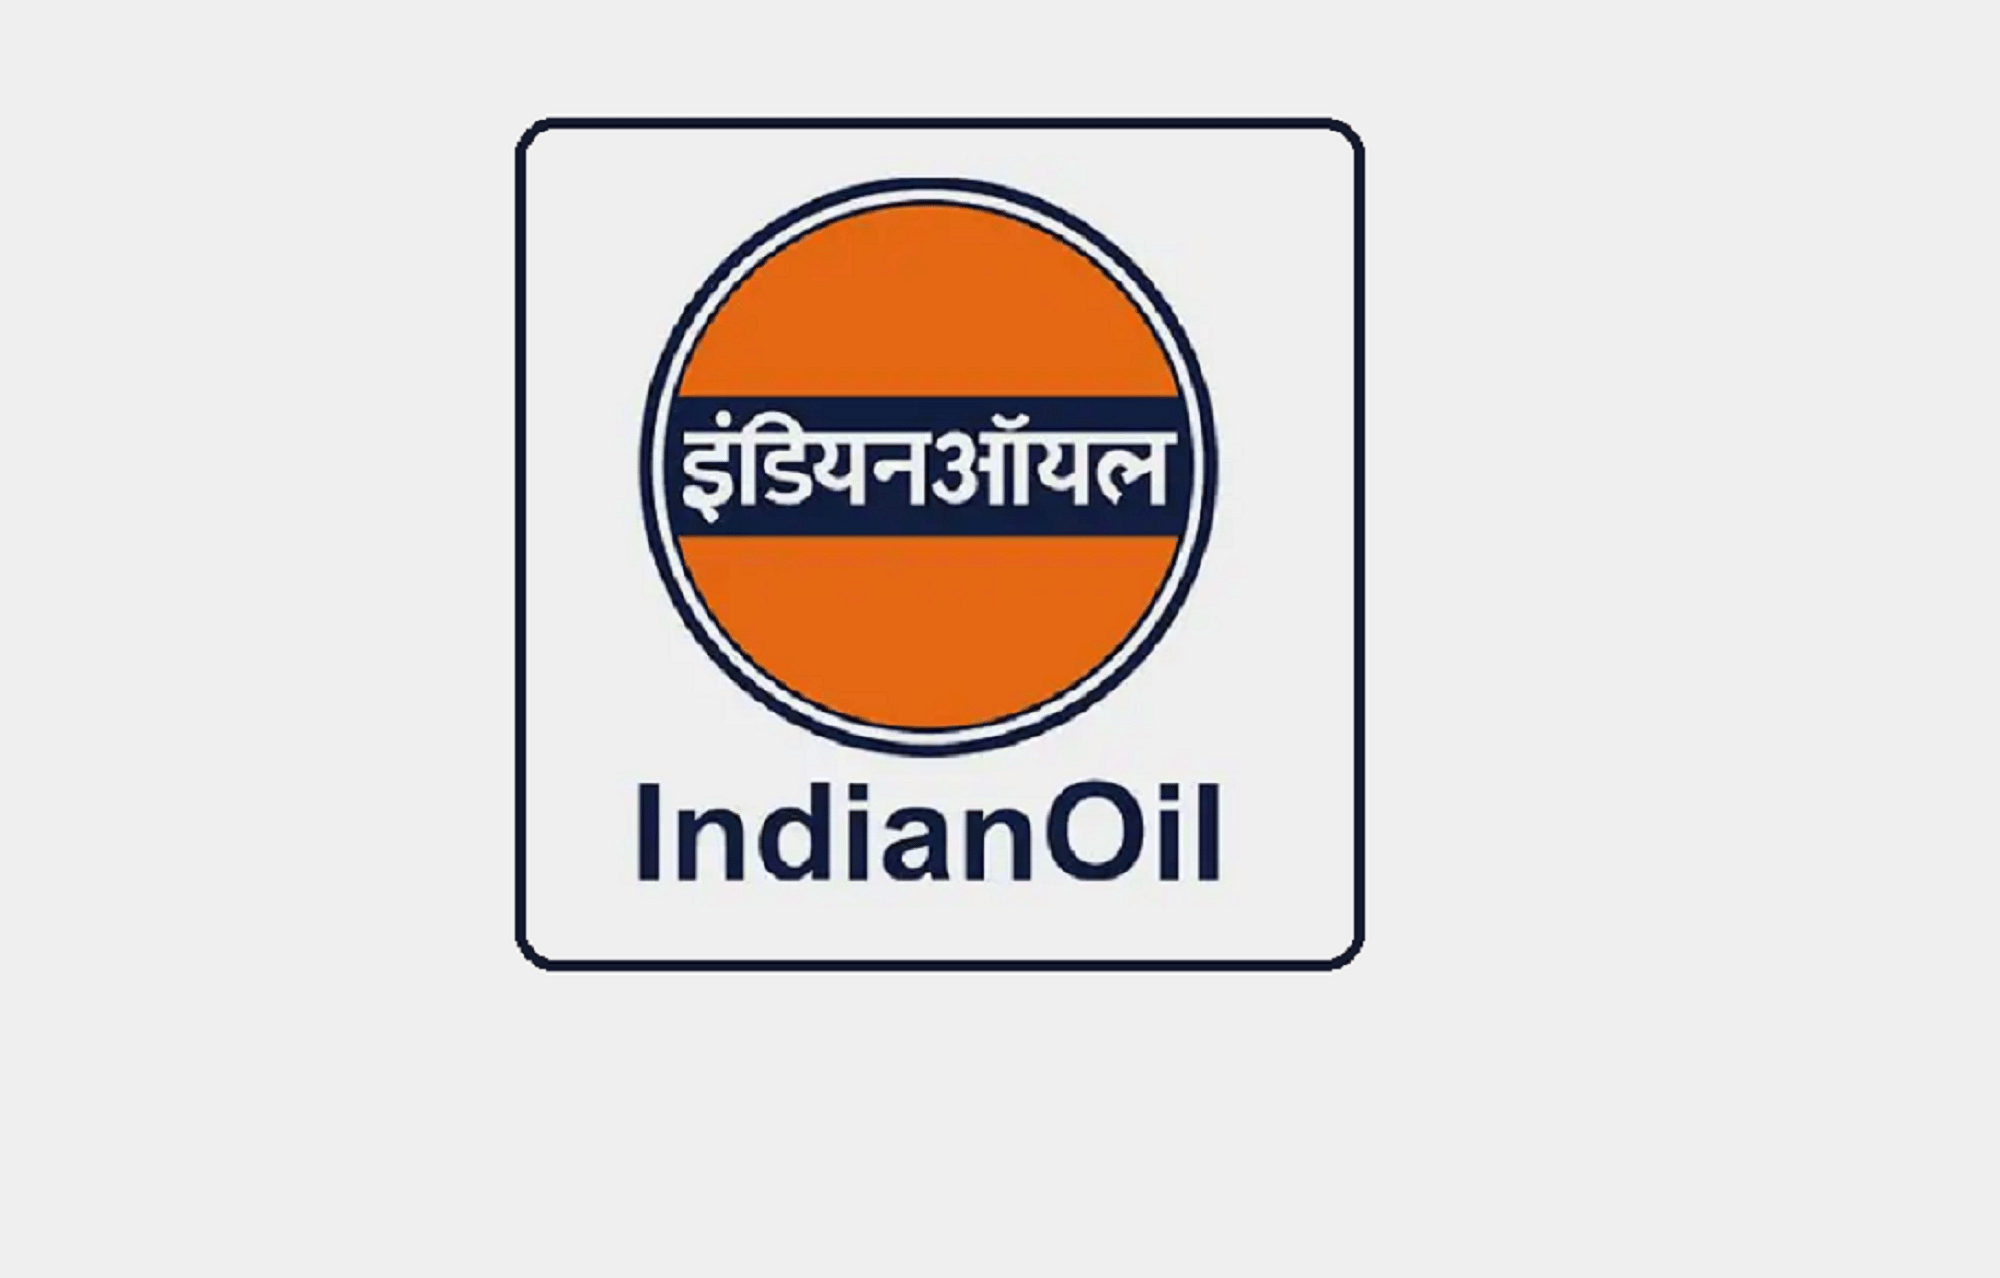 IOCL Invites Applications for Recruitment Process, Deadline in May